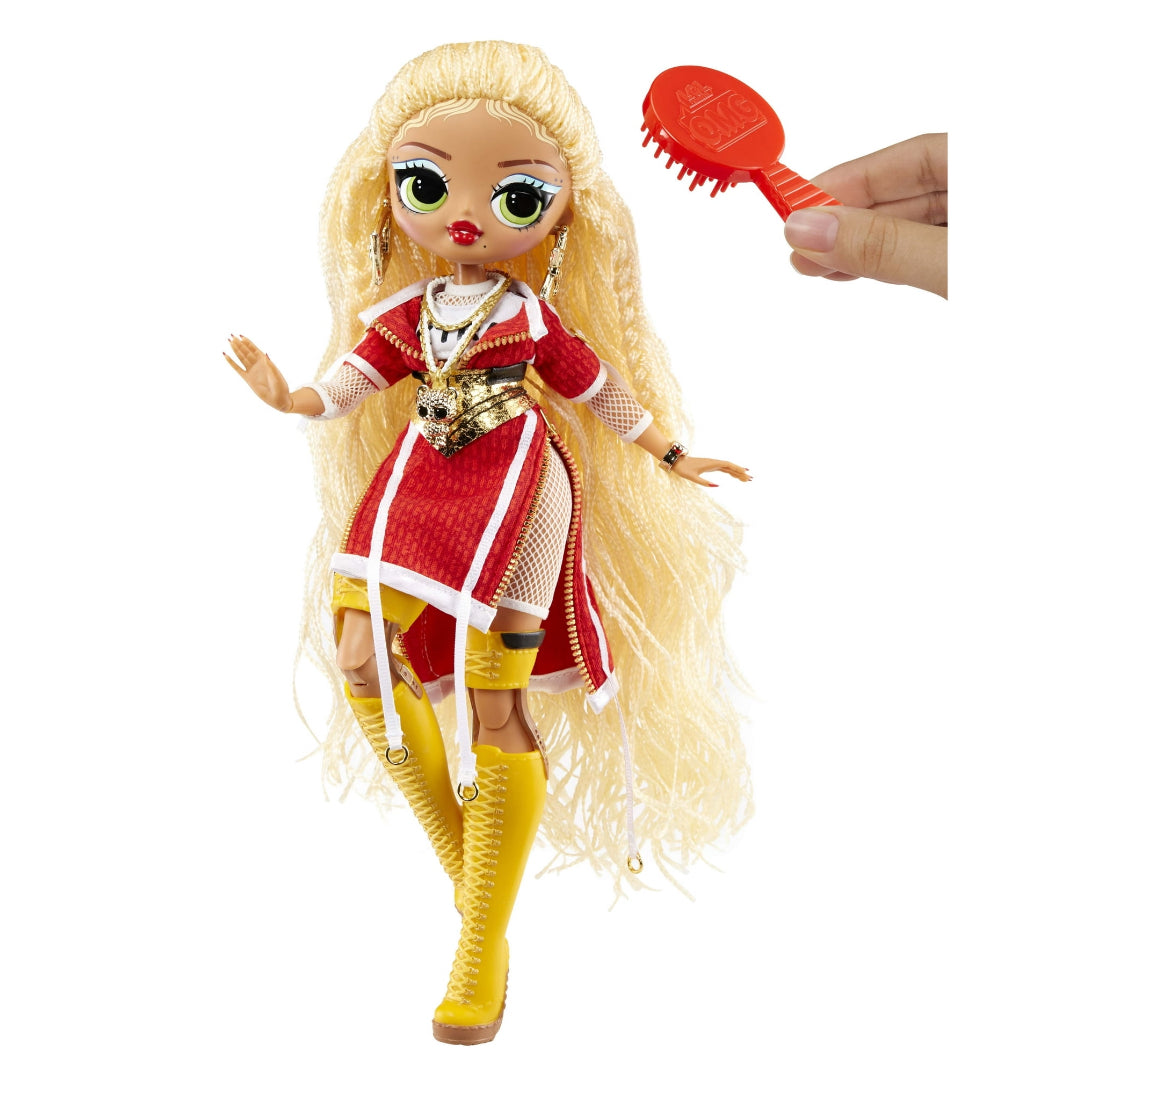 LOL Surprise OMG Fierce Swag Fashion Doll with Surprises 58524